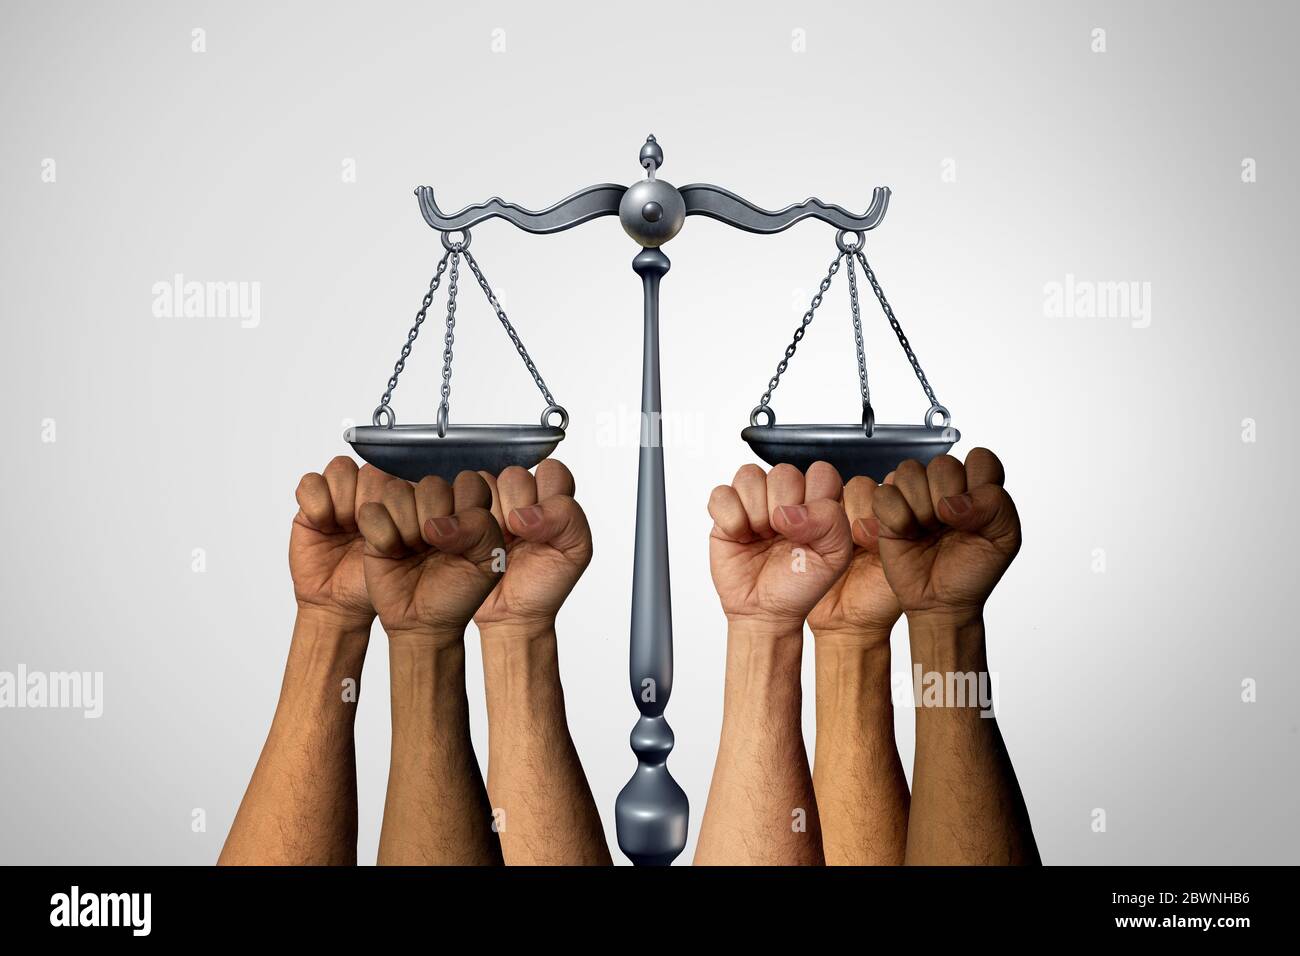 Revolution Justice and legal activism with a group of activist protesters demonstrating for social laws to fight unrest with 3D illustration elements. Stock Photo